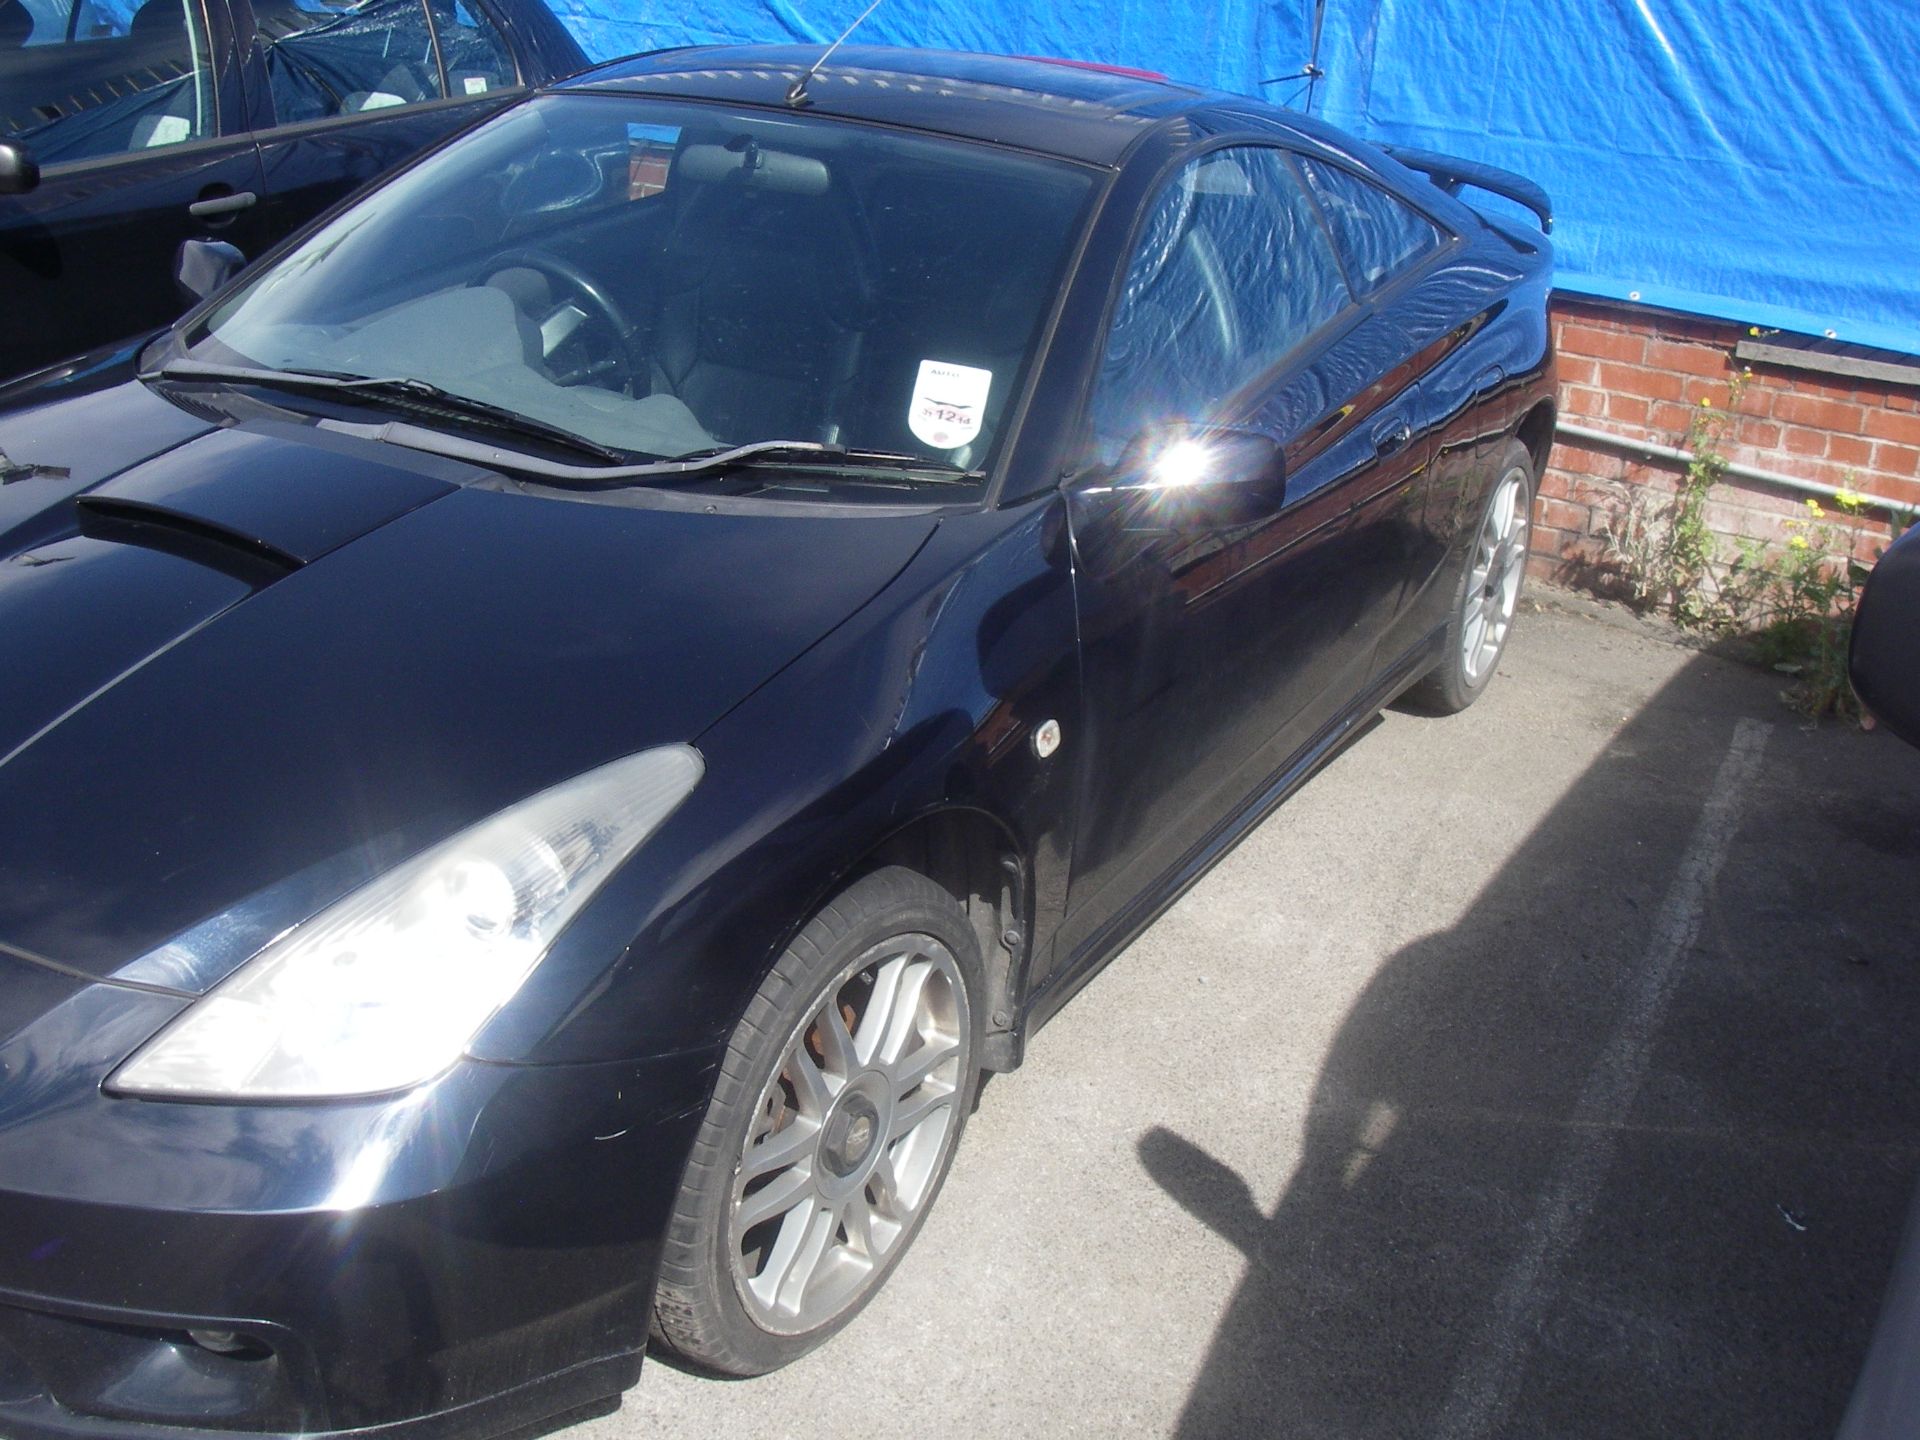 TOYOTA CELICE 1.8L COUPE - petrol - blue - Image 2 of 3